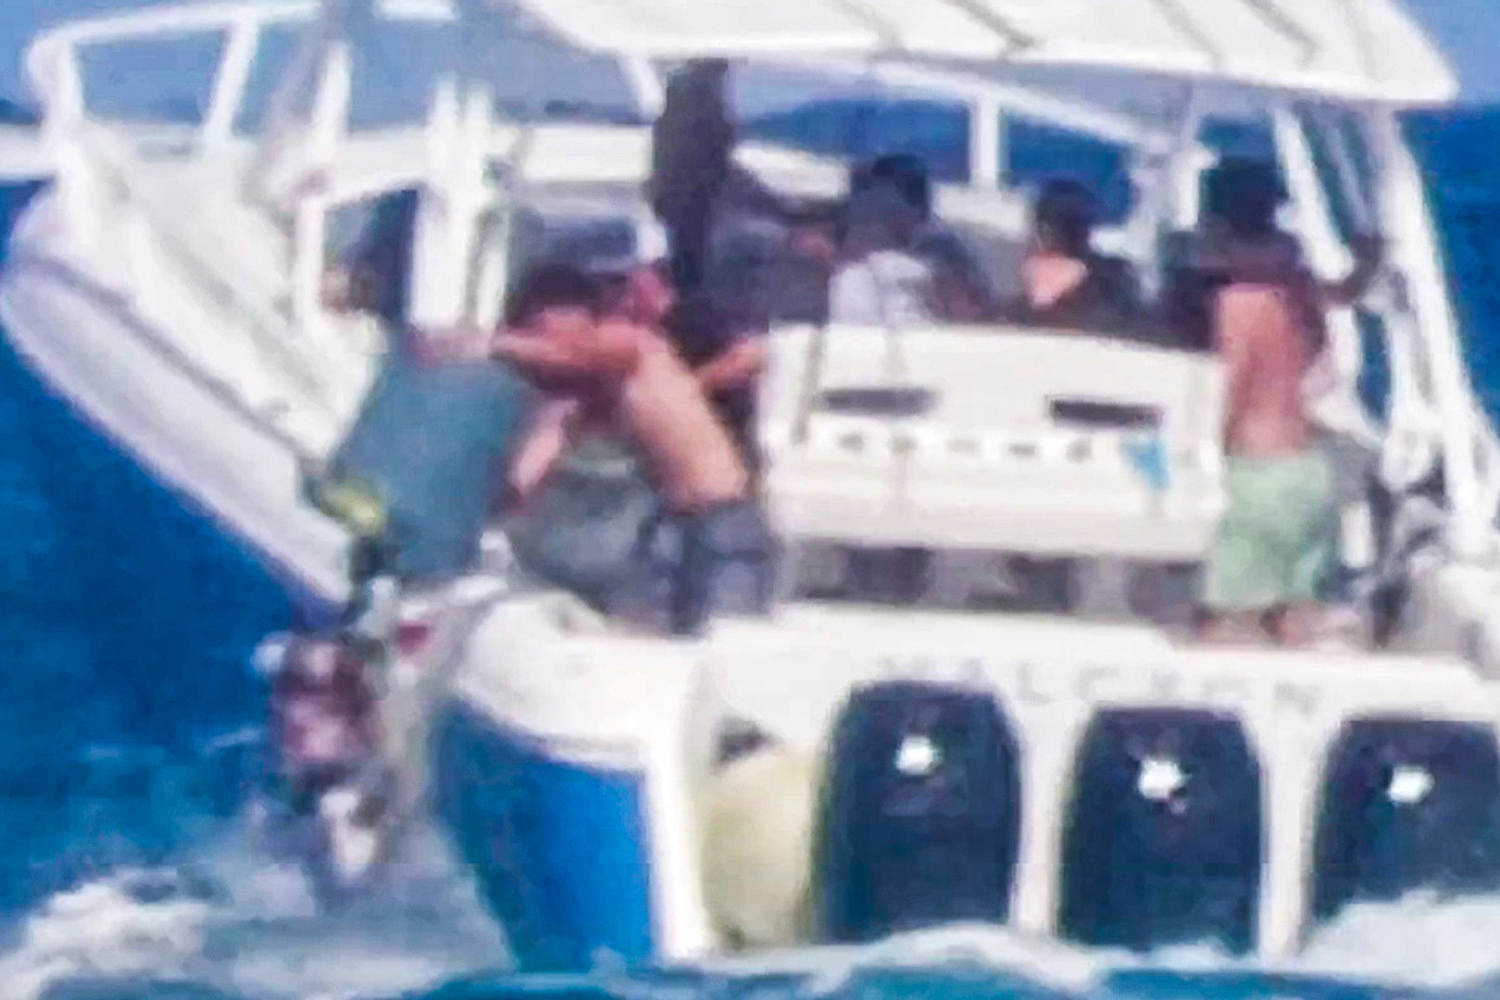 Florida teens seen on viral video dumping trash into ocean from a boat turn themselves in